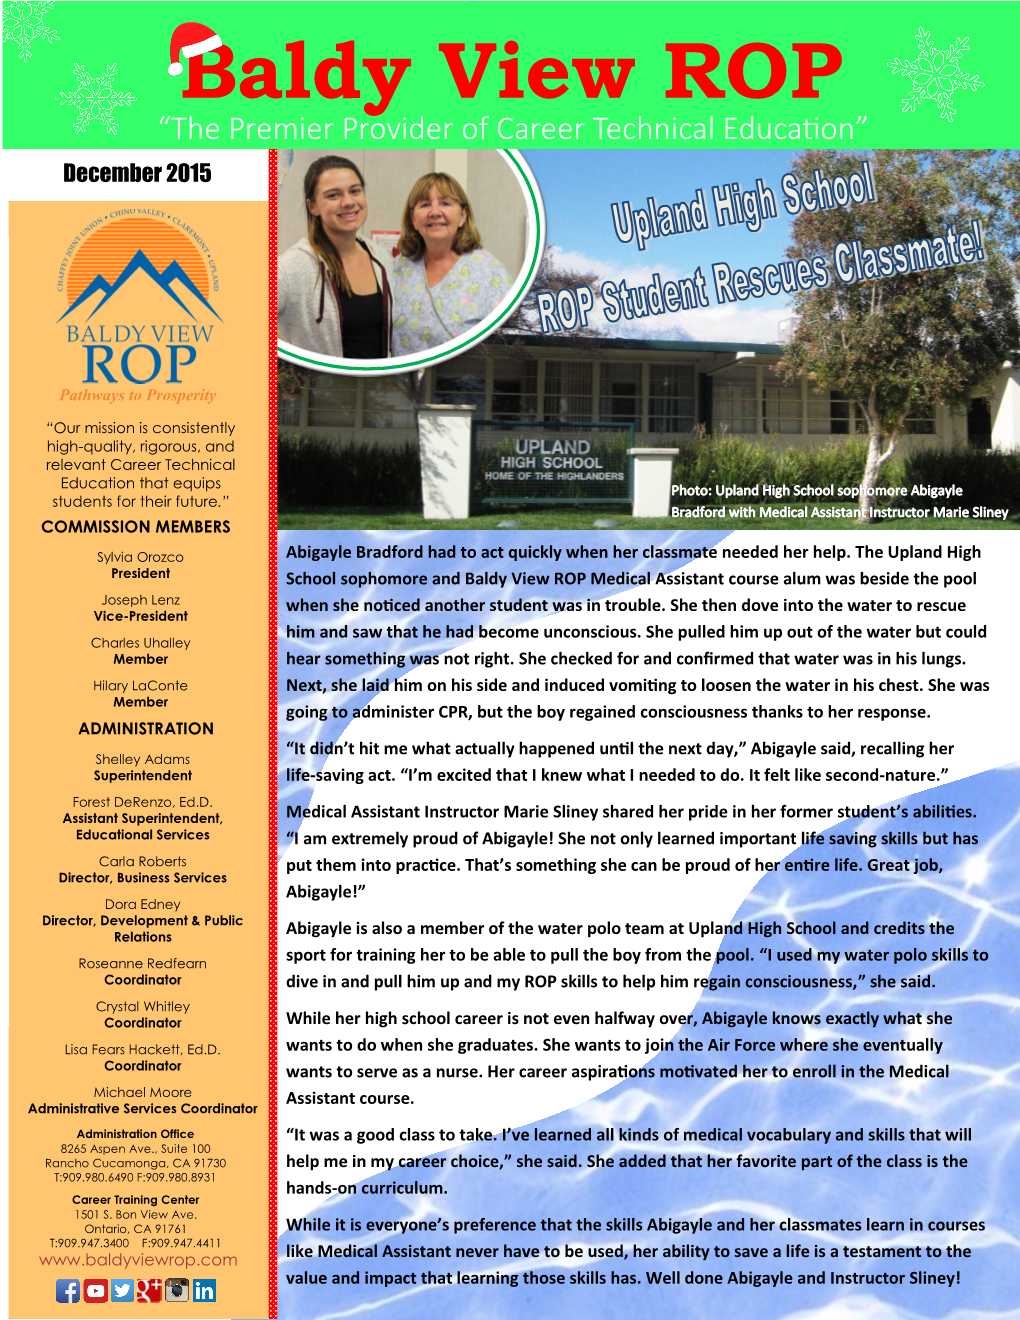 Baldy View ROP “The Premier Provider of Career Technical Education” December 2015